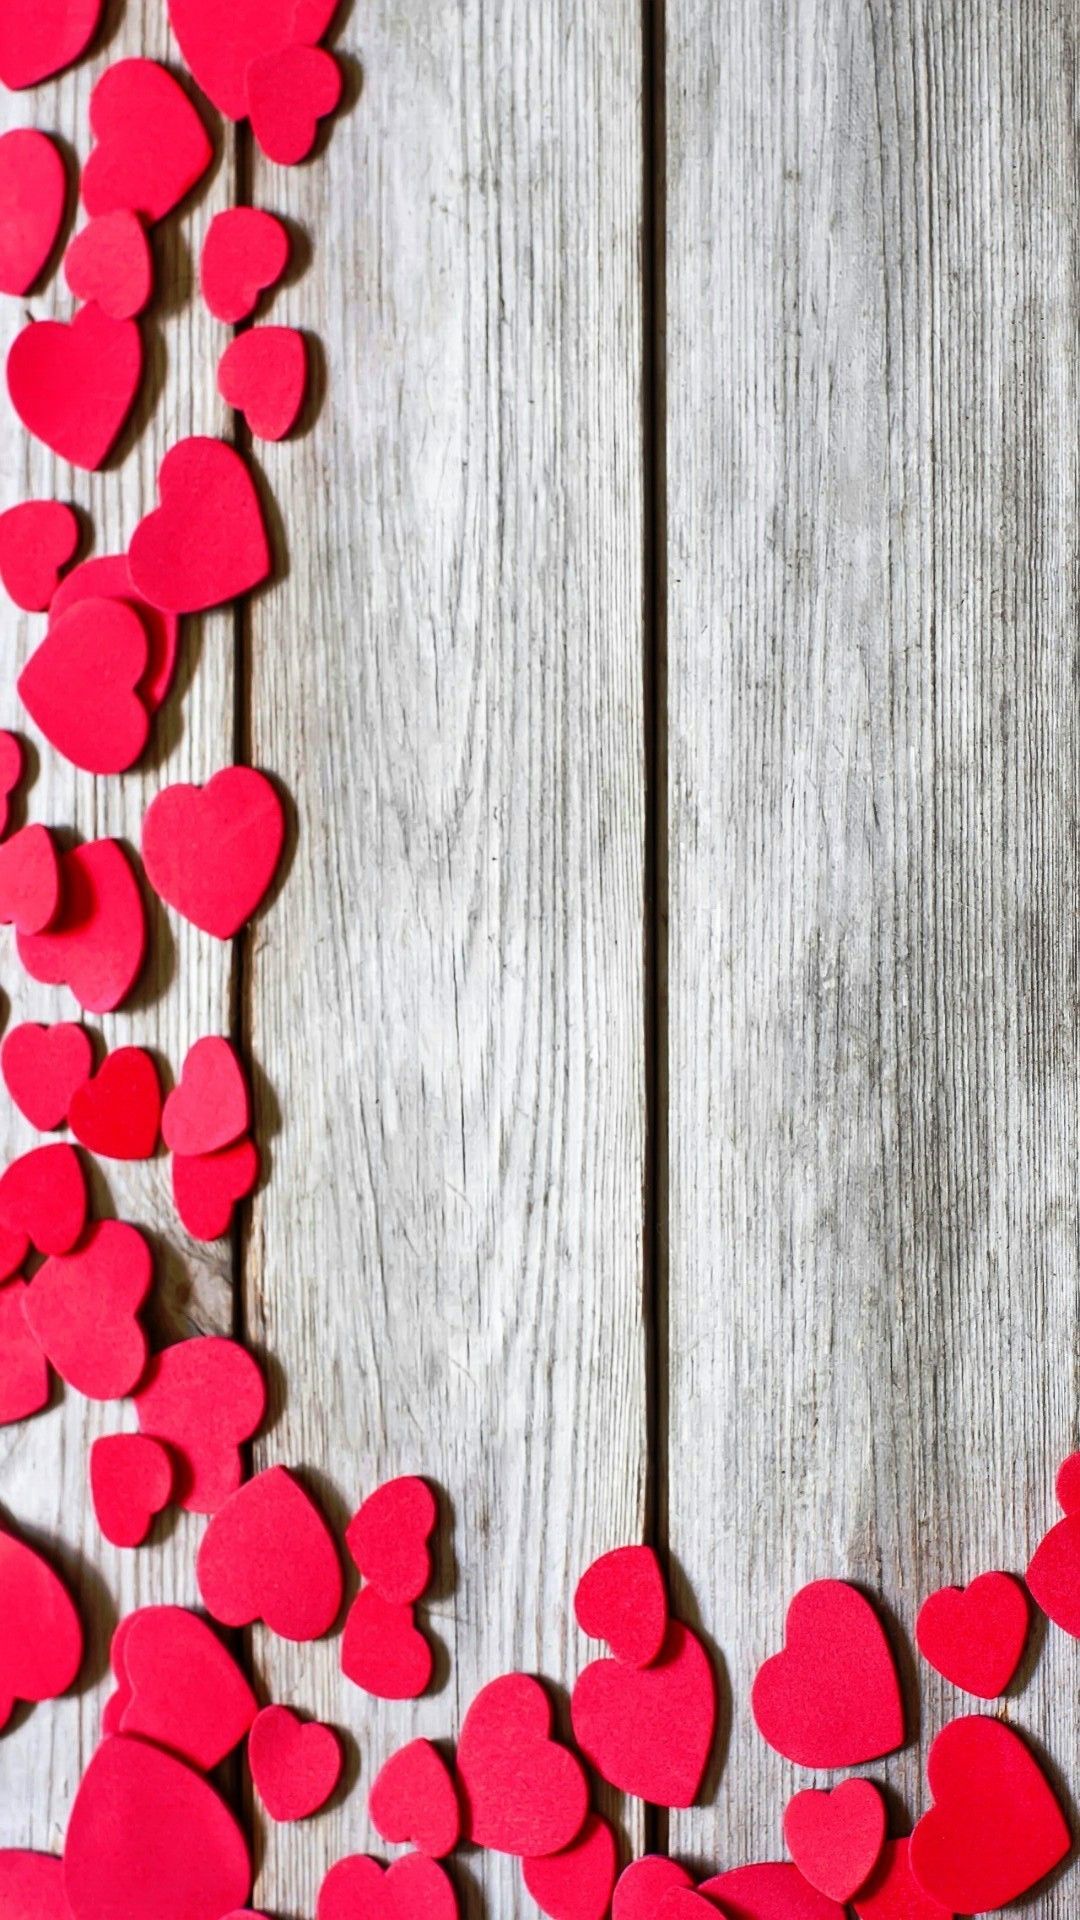 iPhone Wallpaper Red Hearts Wooden Background 3D iPhone